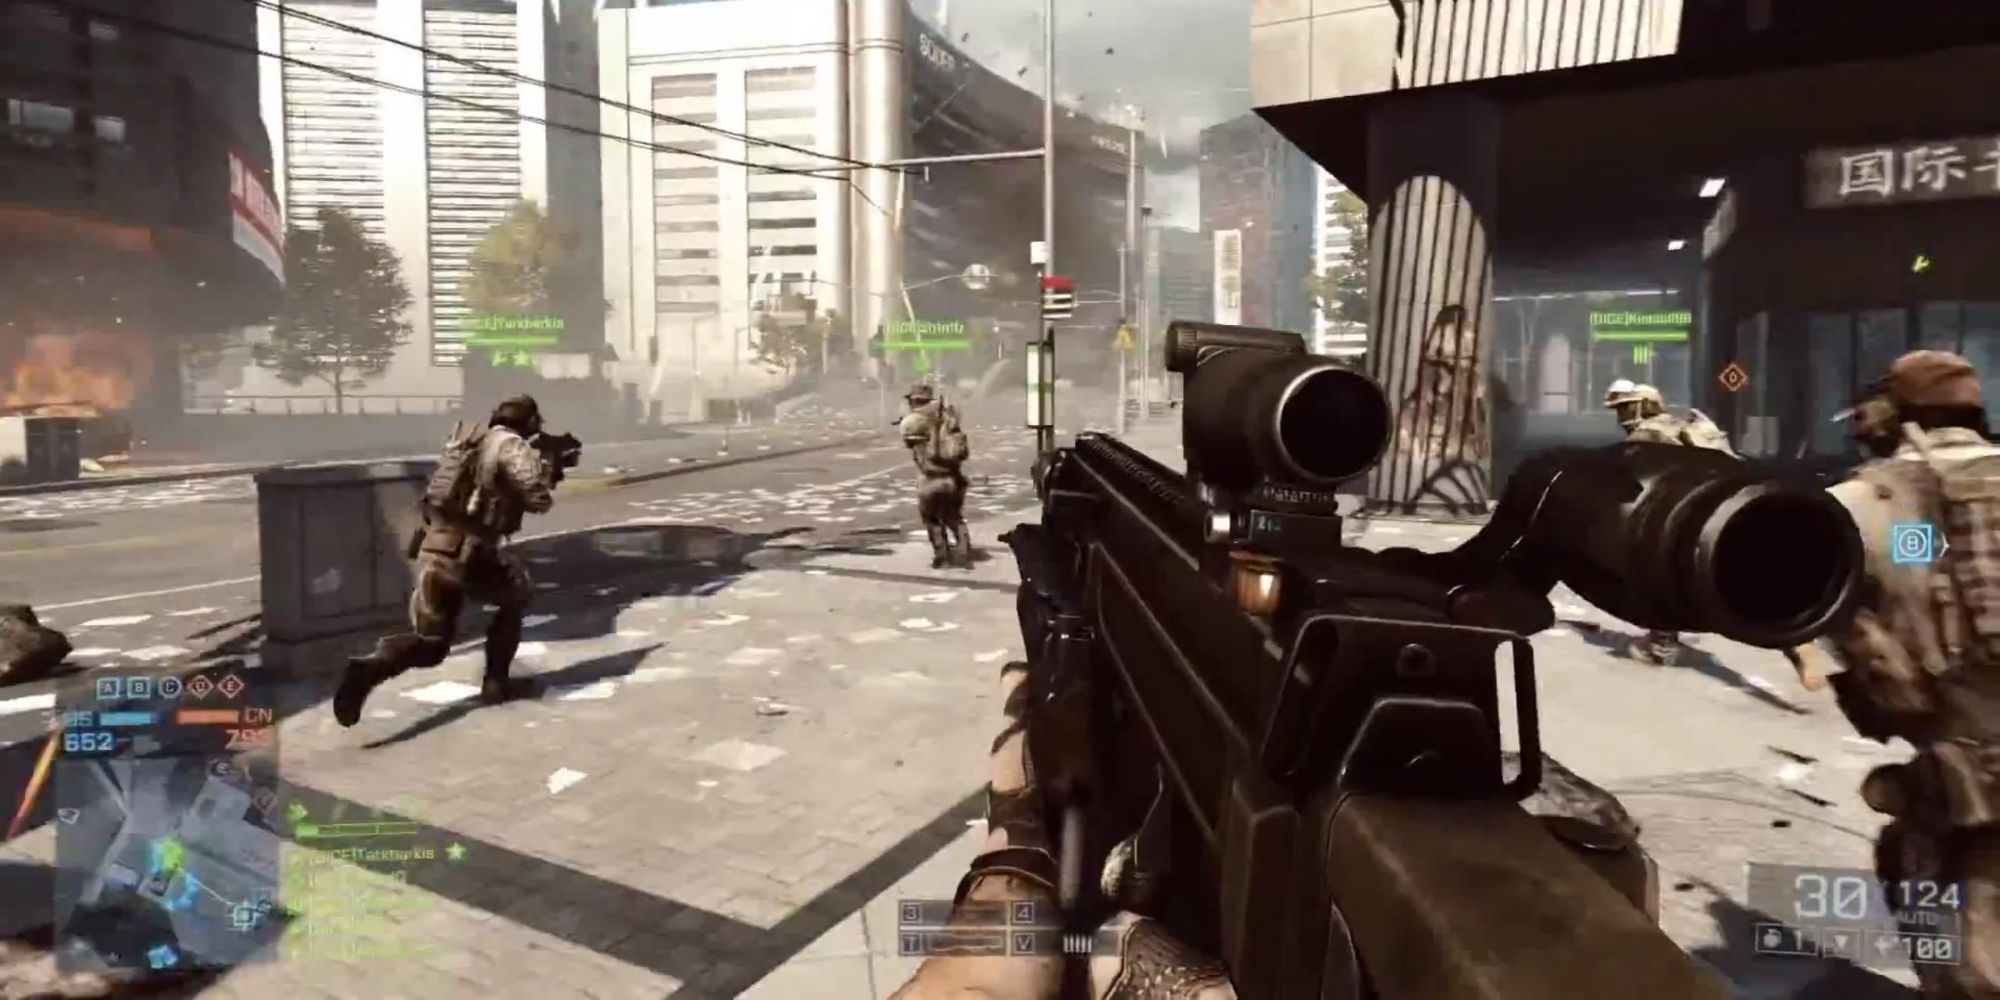 Battlefield 4 players spreading out in multiplayer match